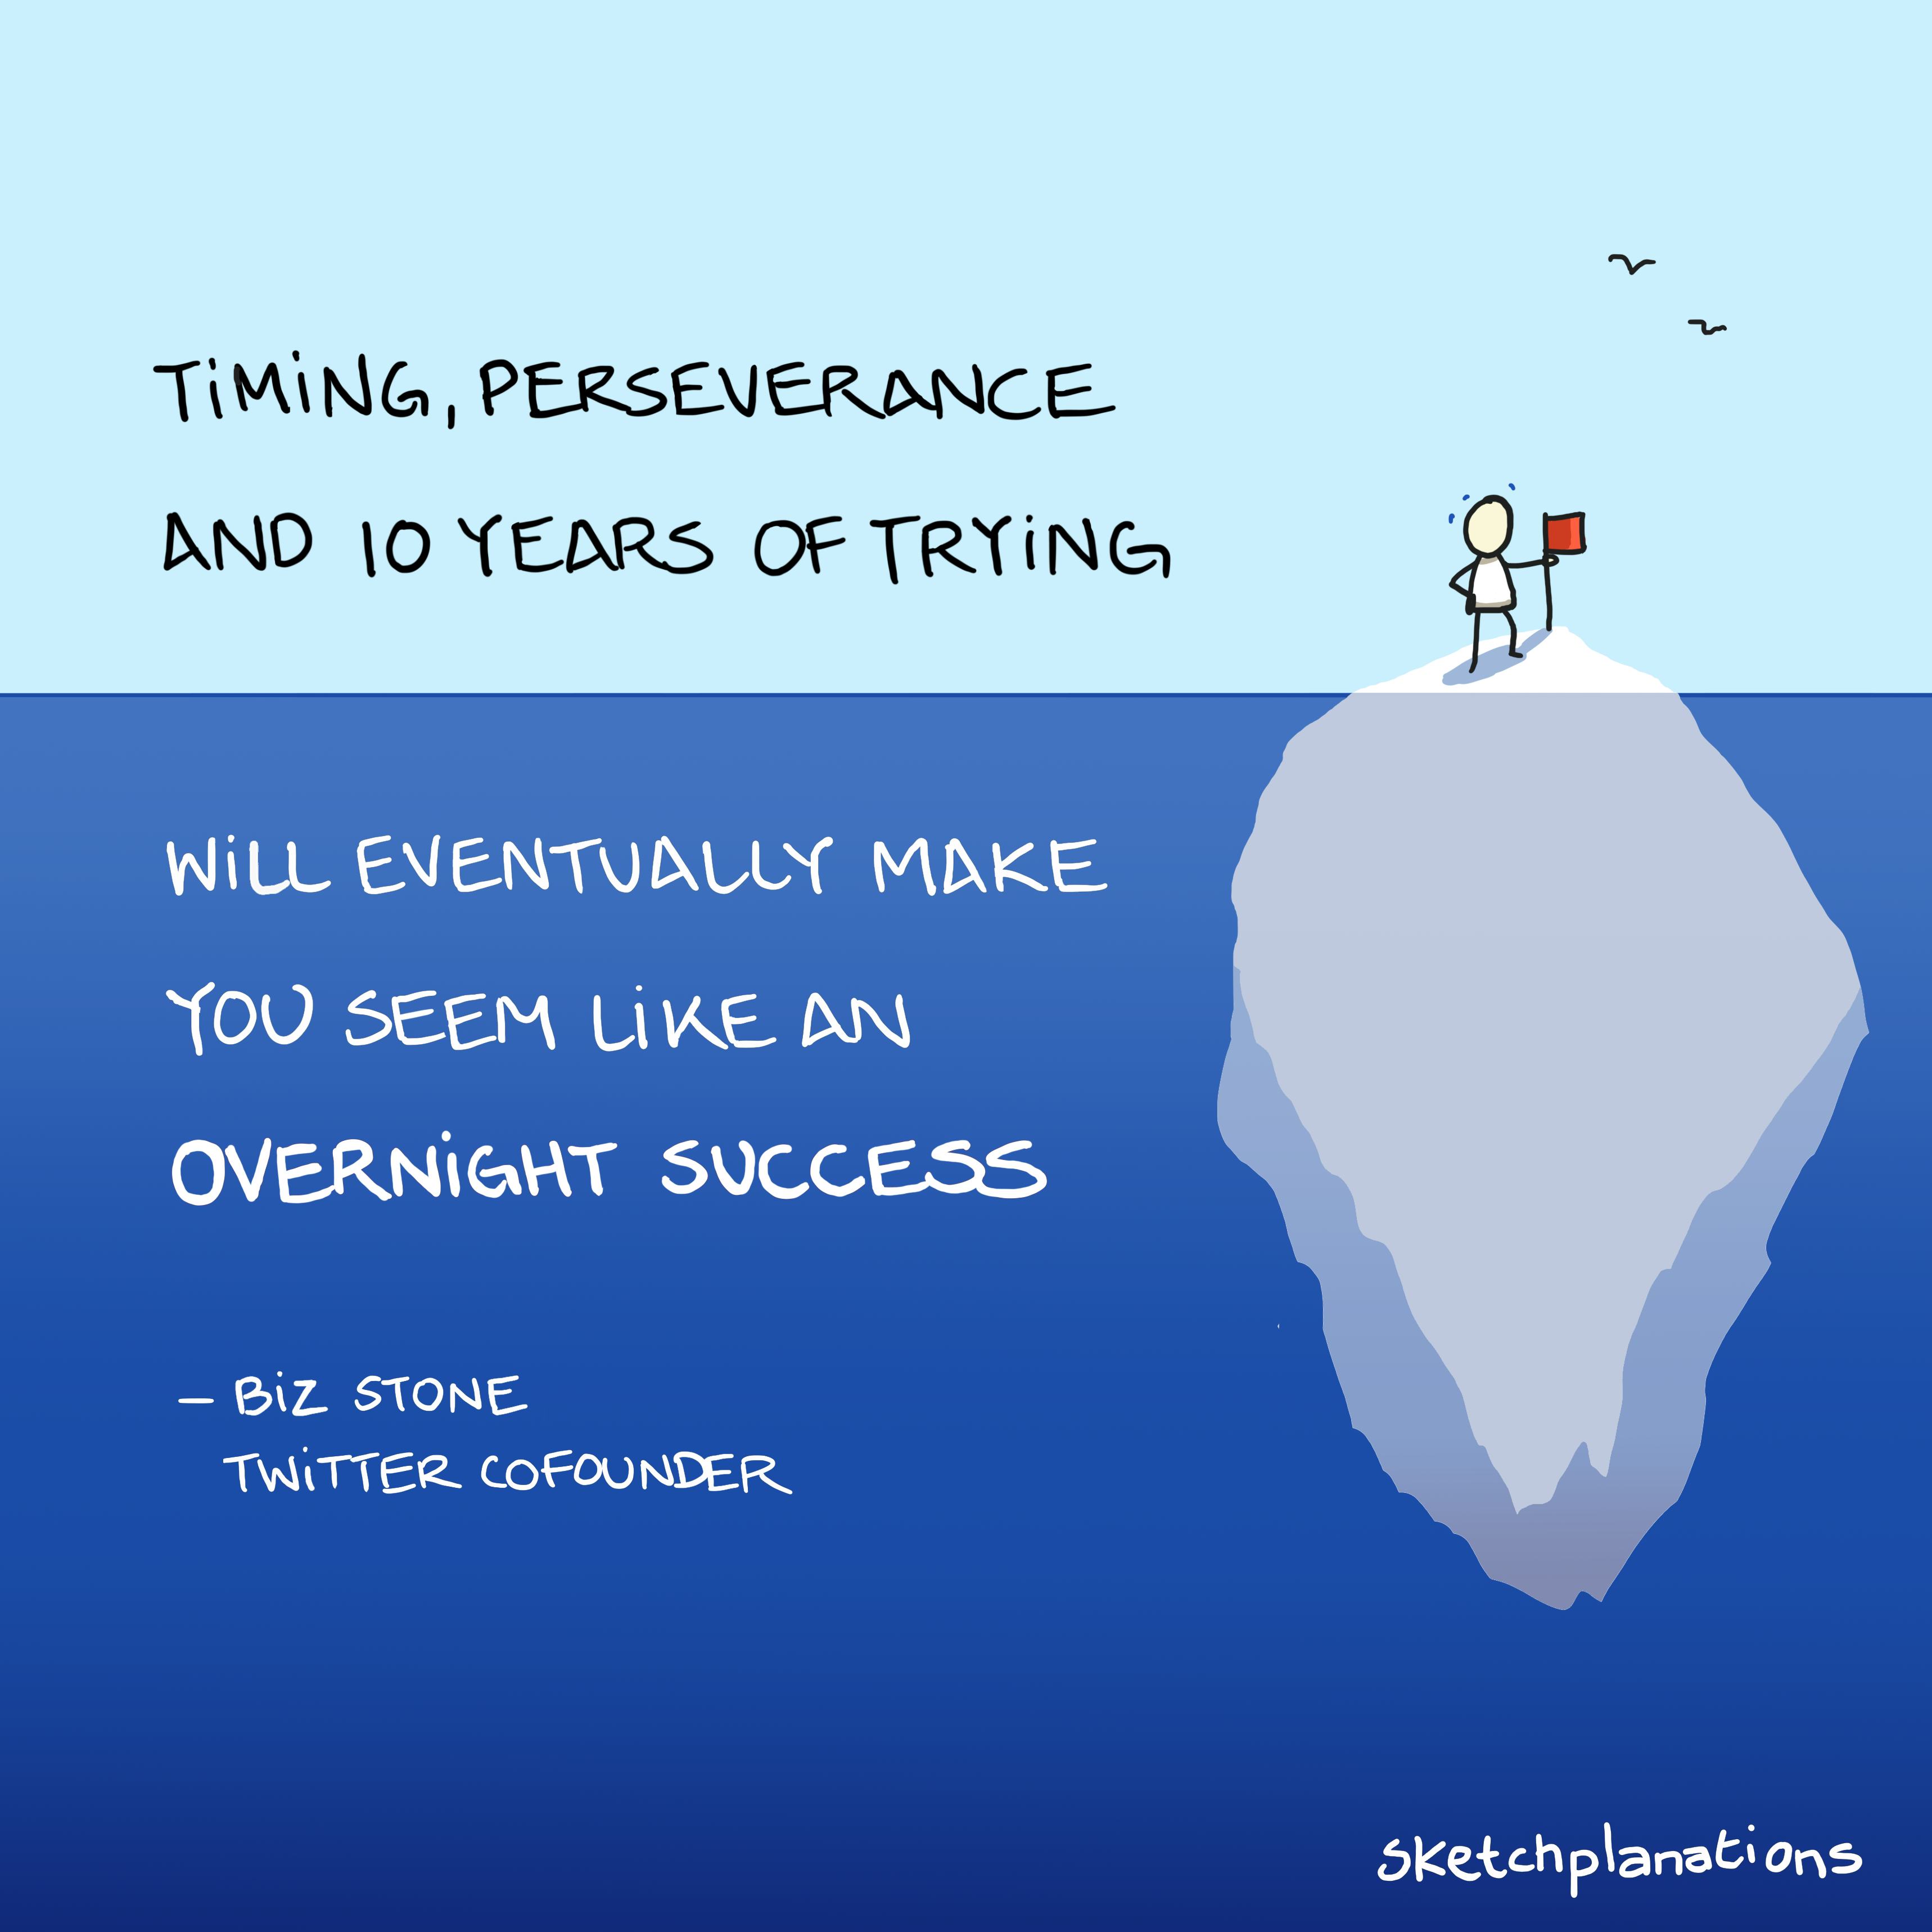 Biz Stone quote: Timing, perseverance and 10 years of trying will eventually make you seem like an overnight success — illustrated by someone on the tip of an iceberg with a whole lot of it underwater